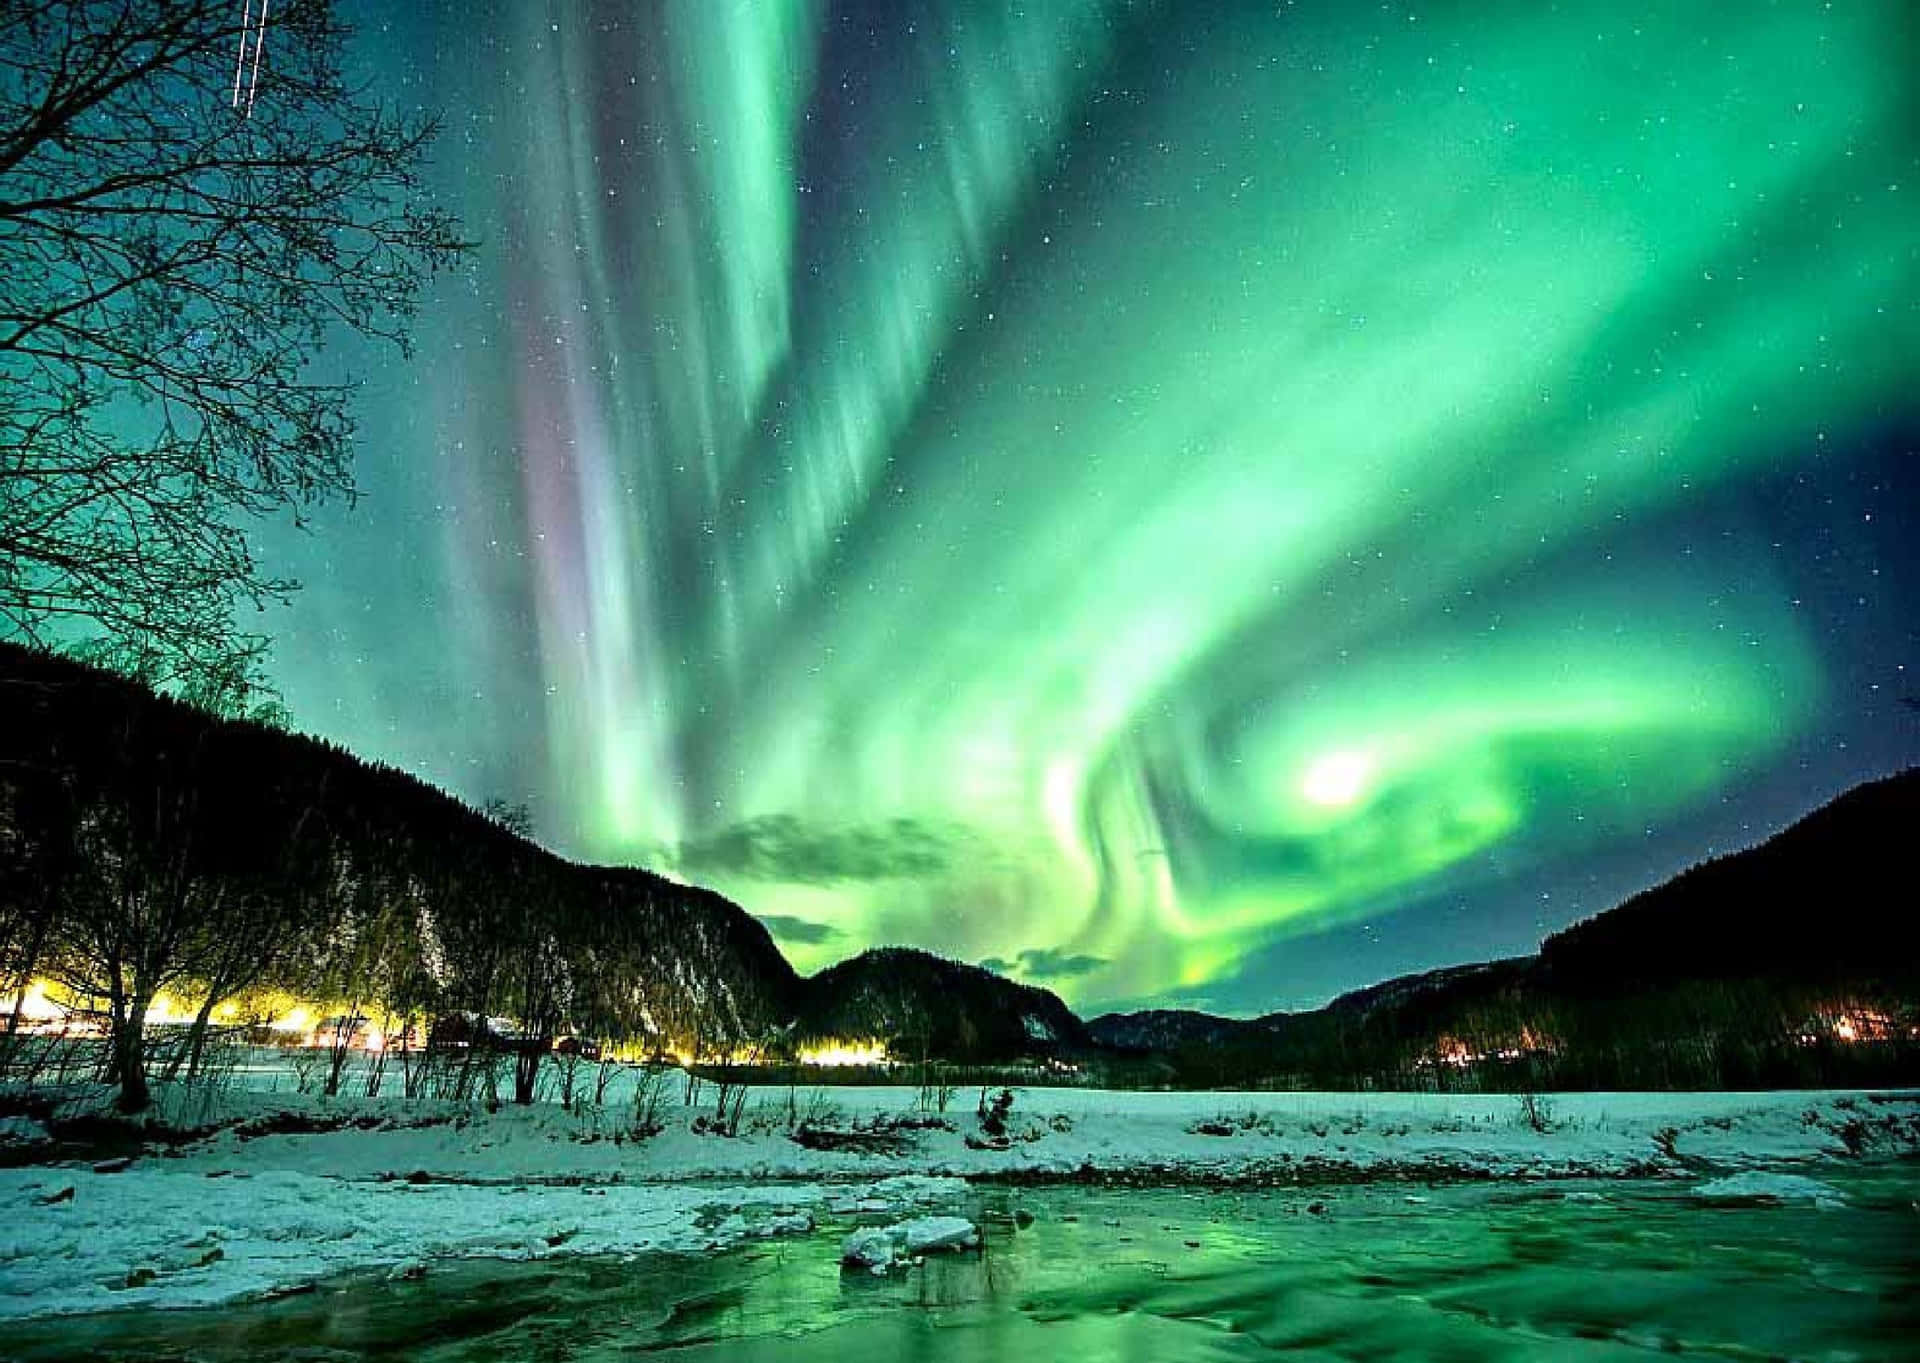 A stunning photograph of the colorful aurora in the night sky.